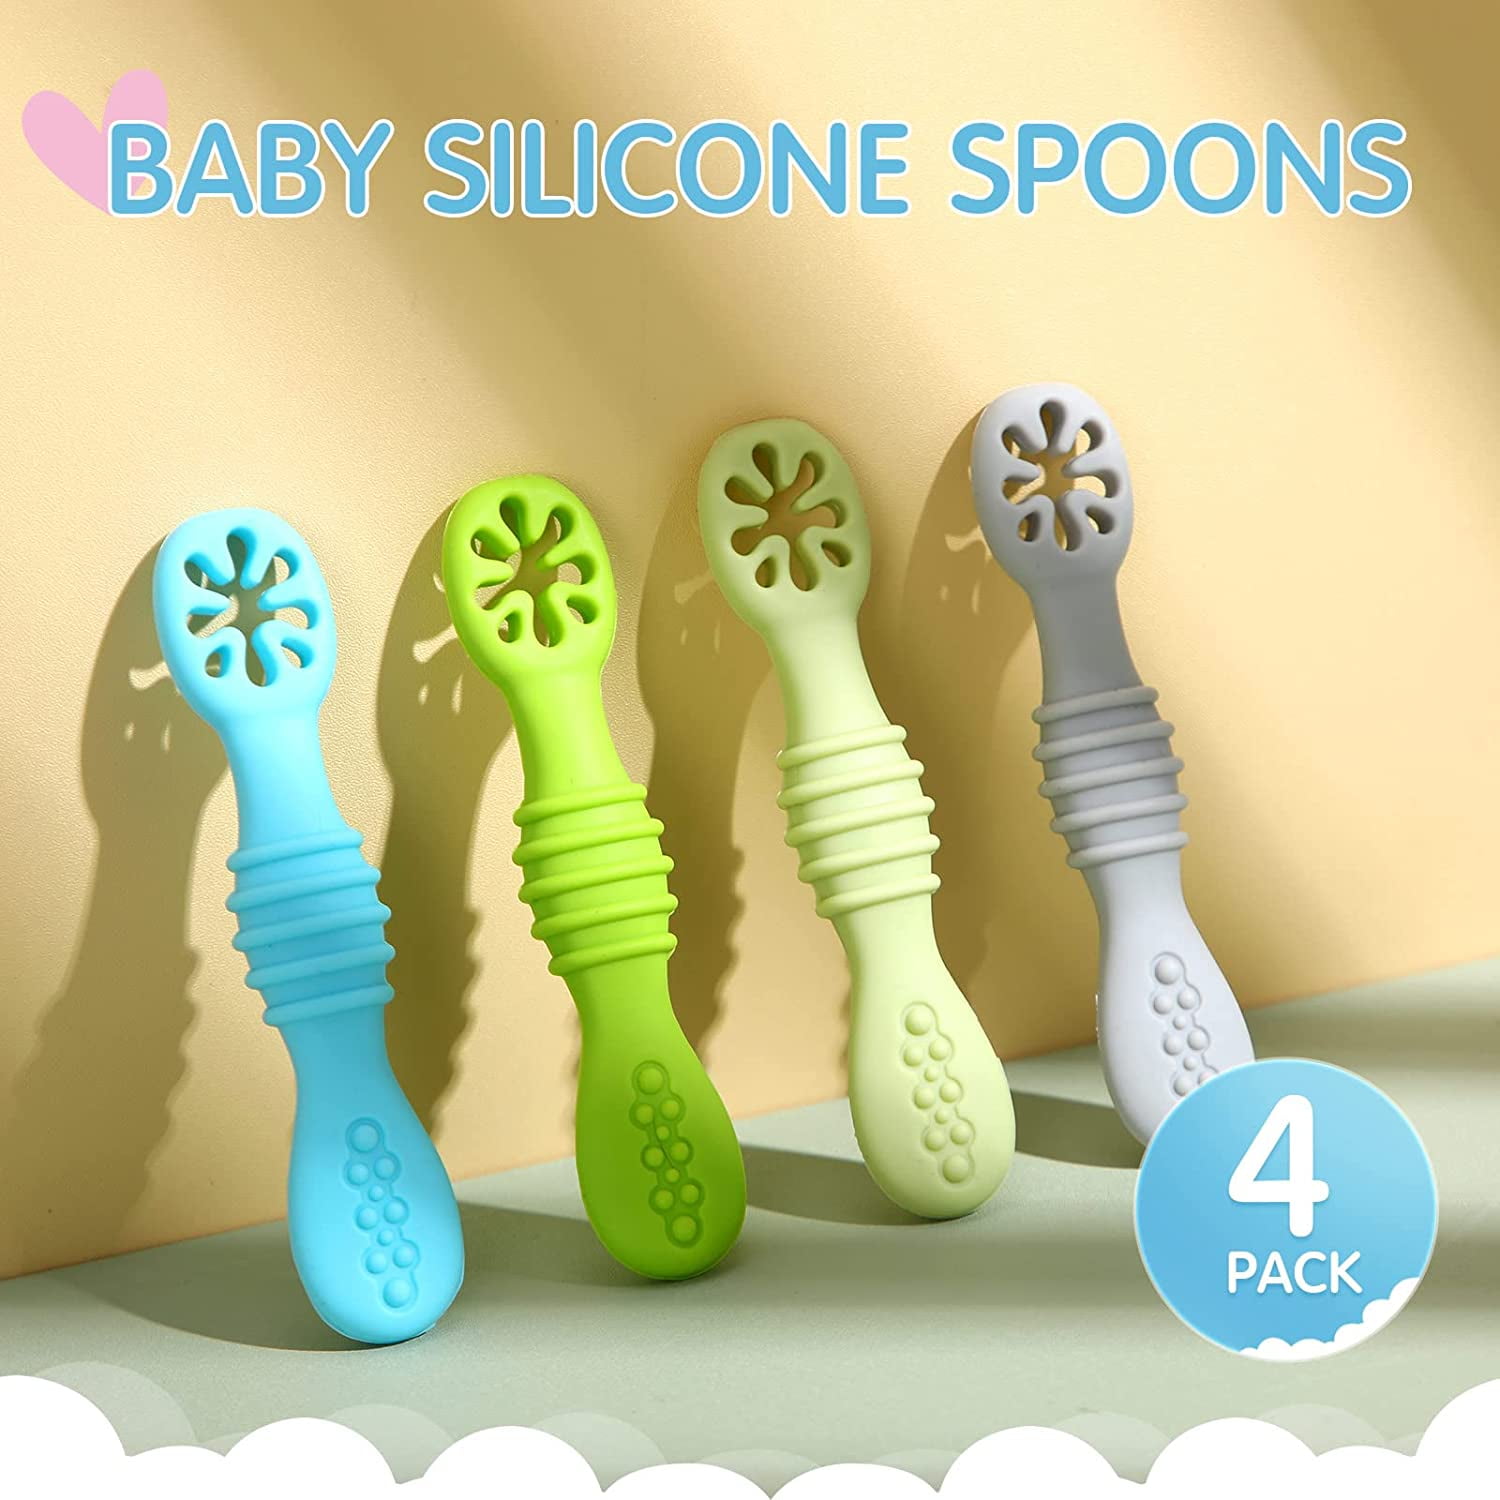  Baby Spoons First Stage 4 Months,6-12 Months Infant Spoons  BabySoft Silicone Baby Utensils Set Self Feeding Trai ning Spoon for Babies  Led Weaning 2-pack : Baby